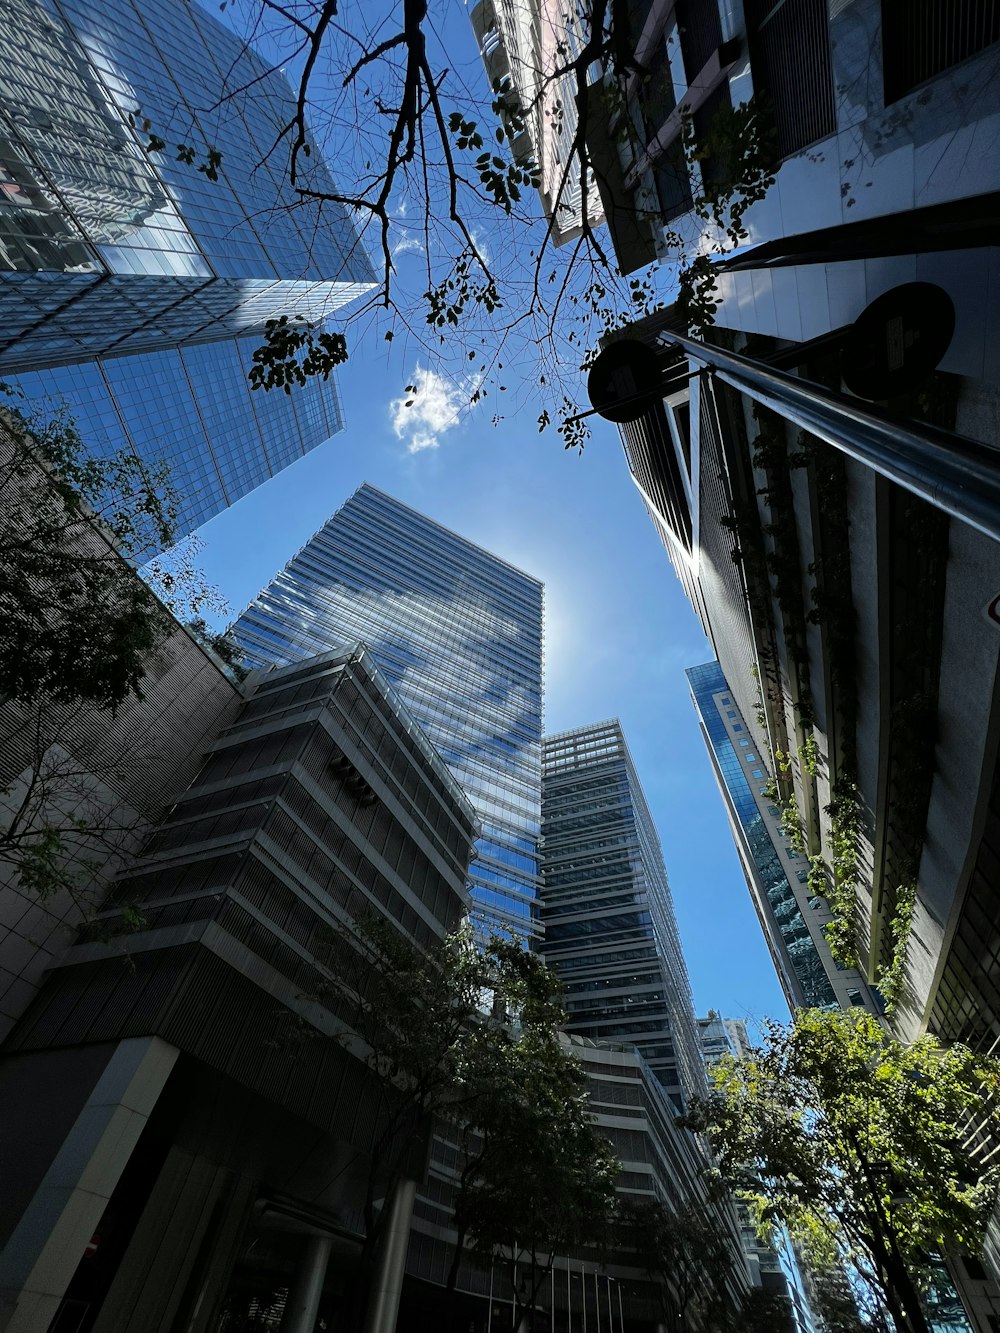 looking up at tall buildings in a city